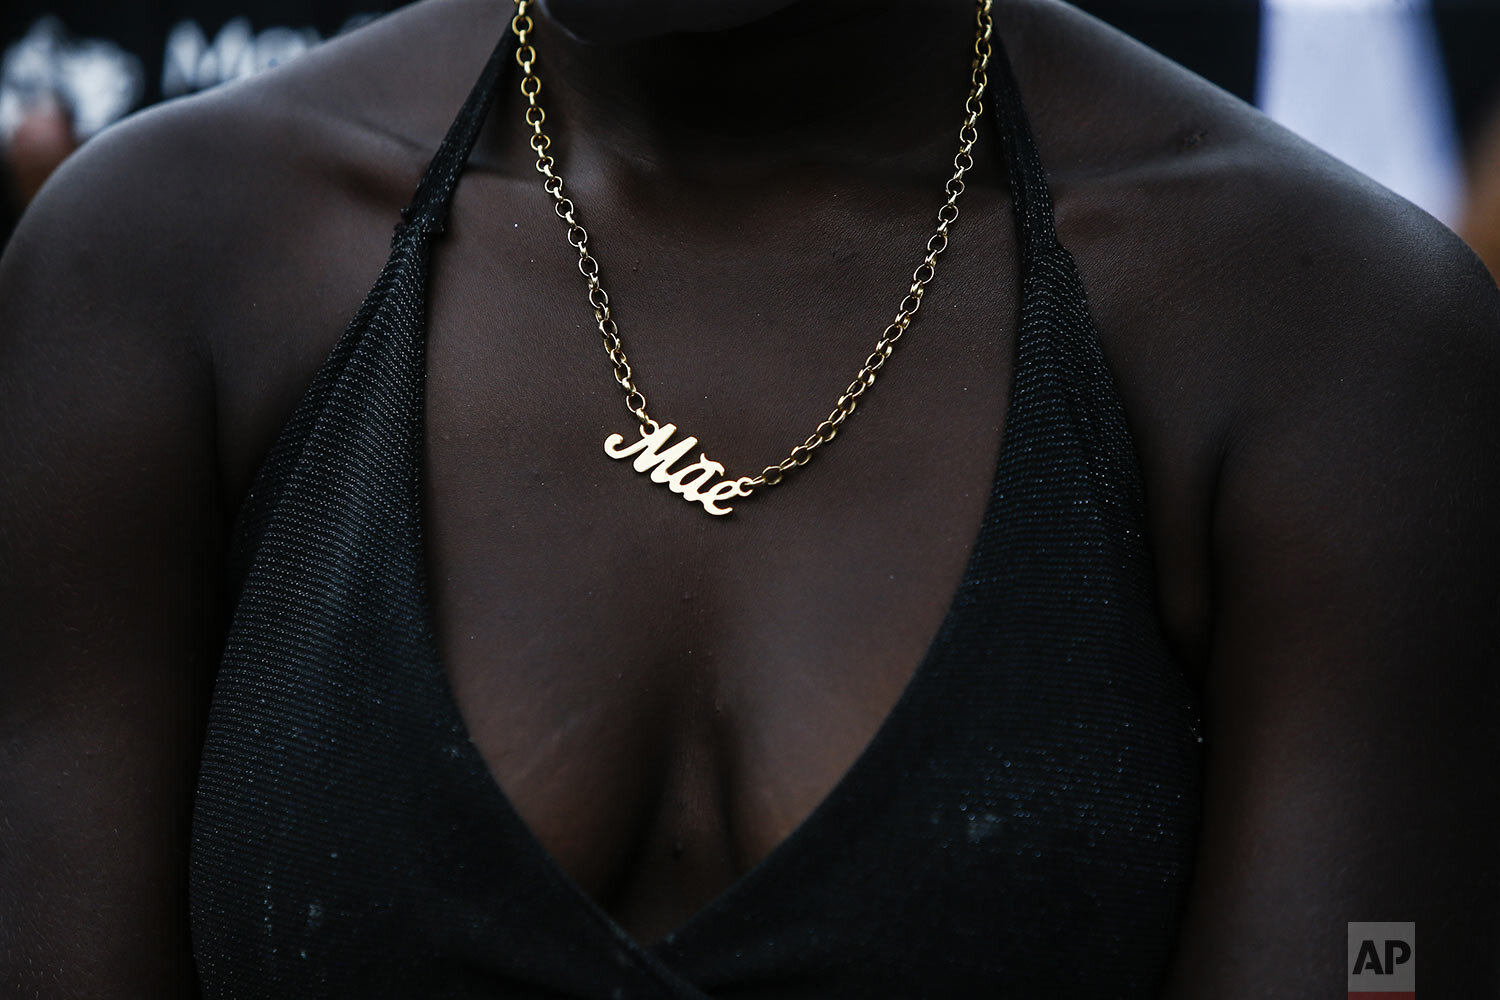  A woman wearing a necklace with the word "Mother" in Portuguese protests the killing of 4-year-old Emily Victoria Silva dos Santos, and 7-year-old Rebeca Beatriz Rodrigues dos Santos, in Duque de Caxias, Rio de Janeiro state, Brazil, Sunday, Dec. 6,